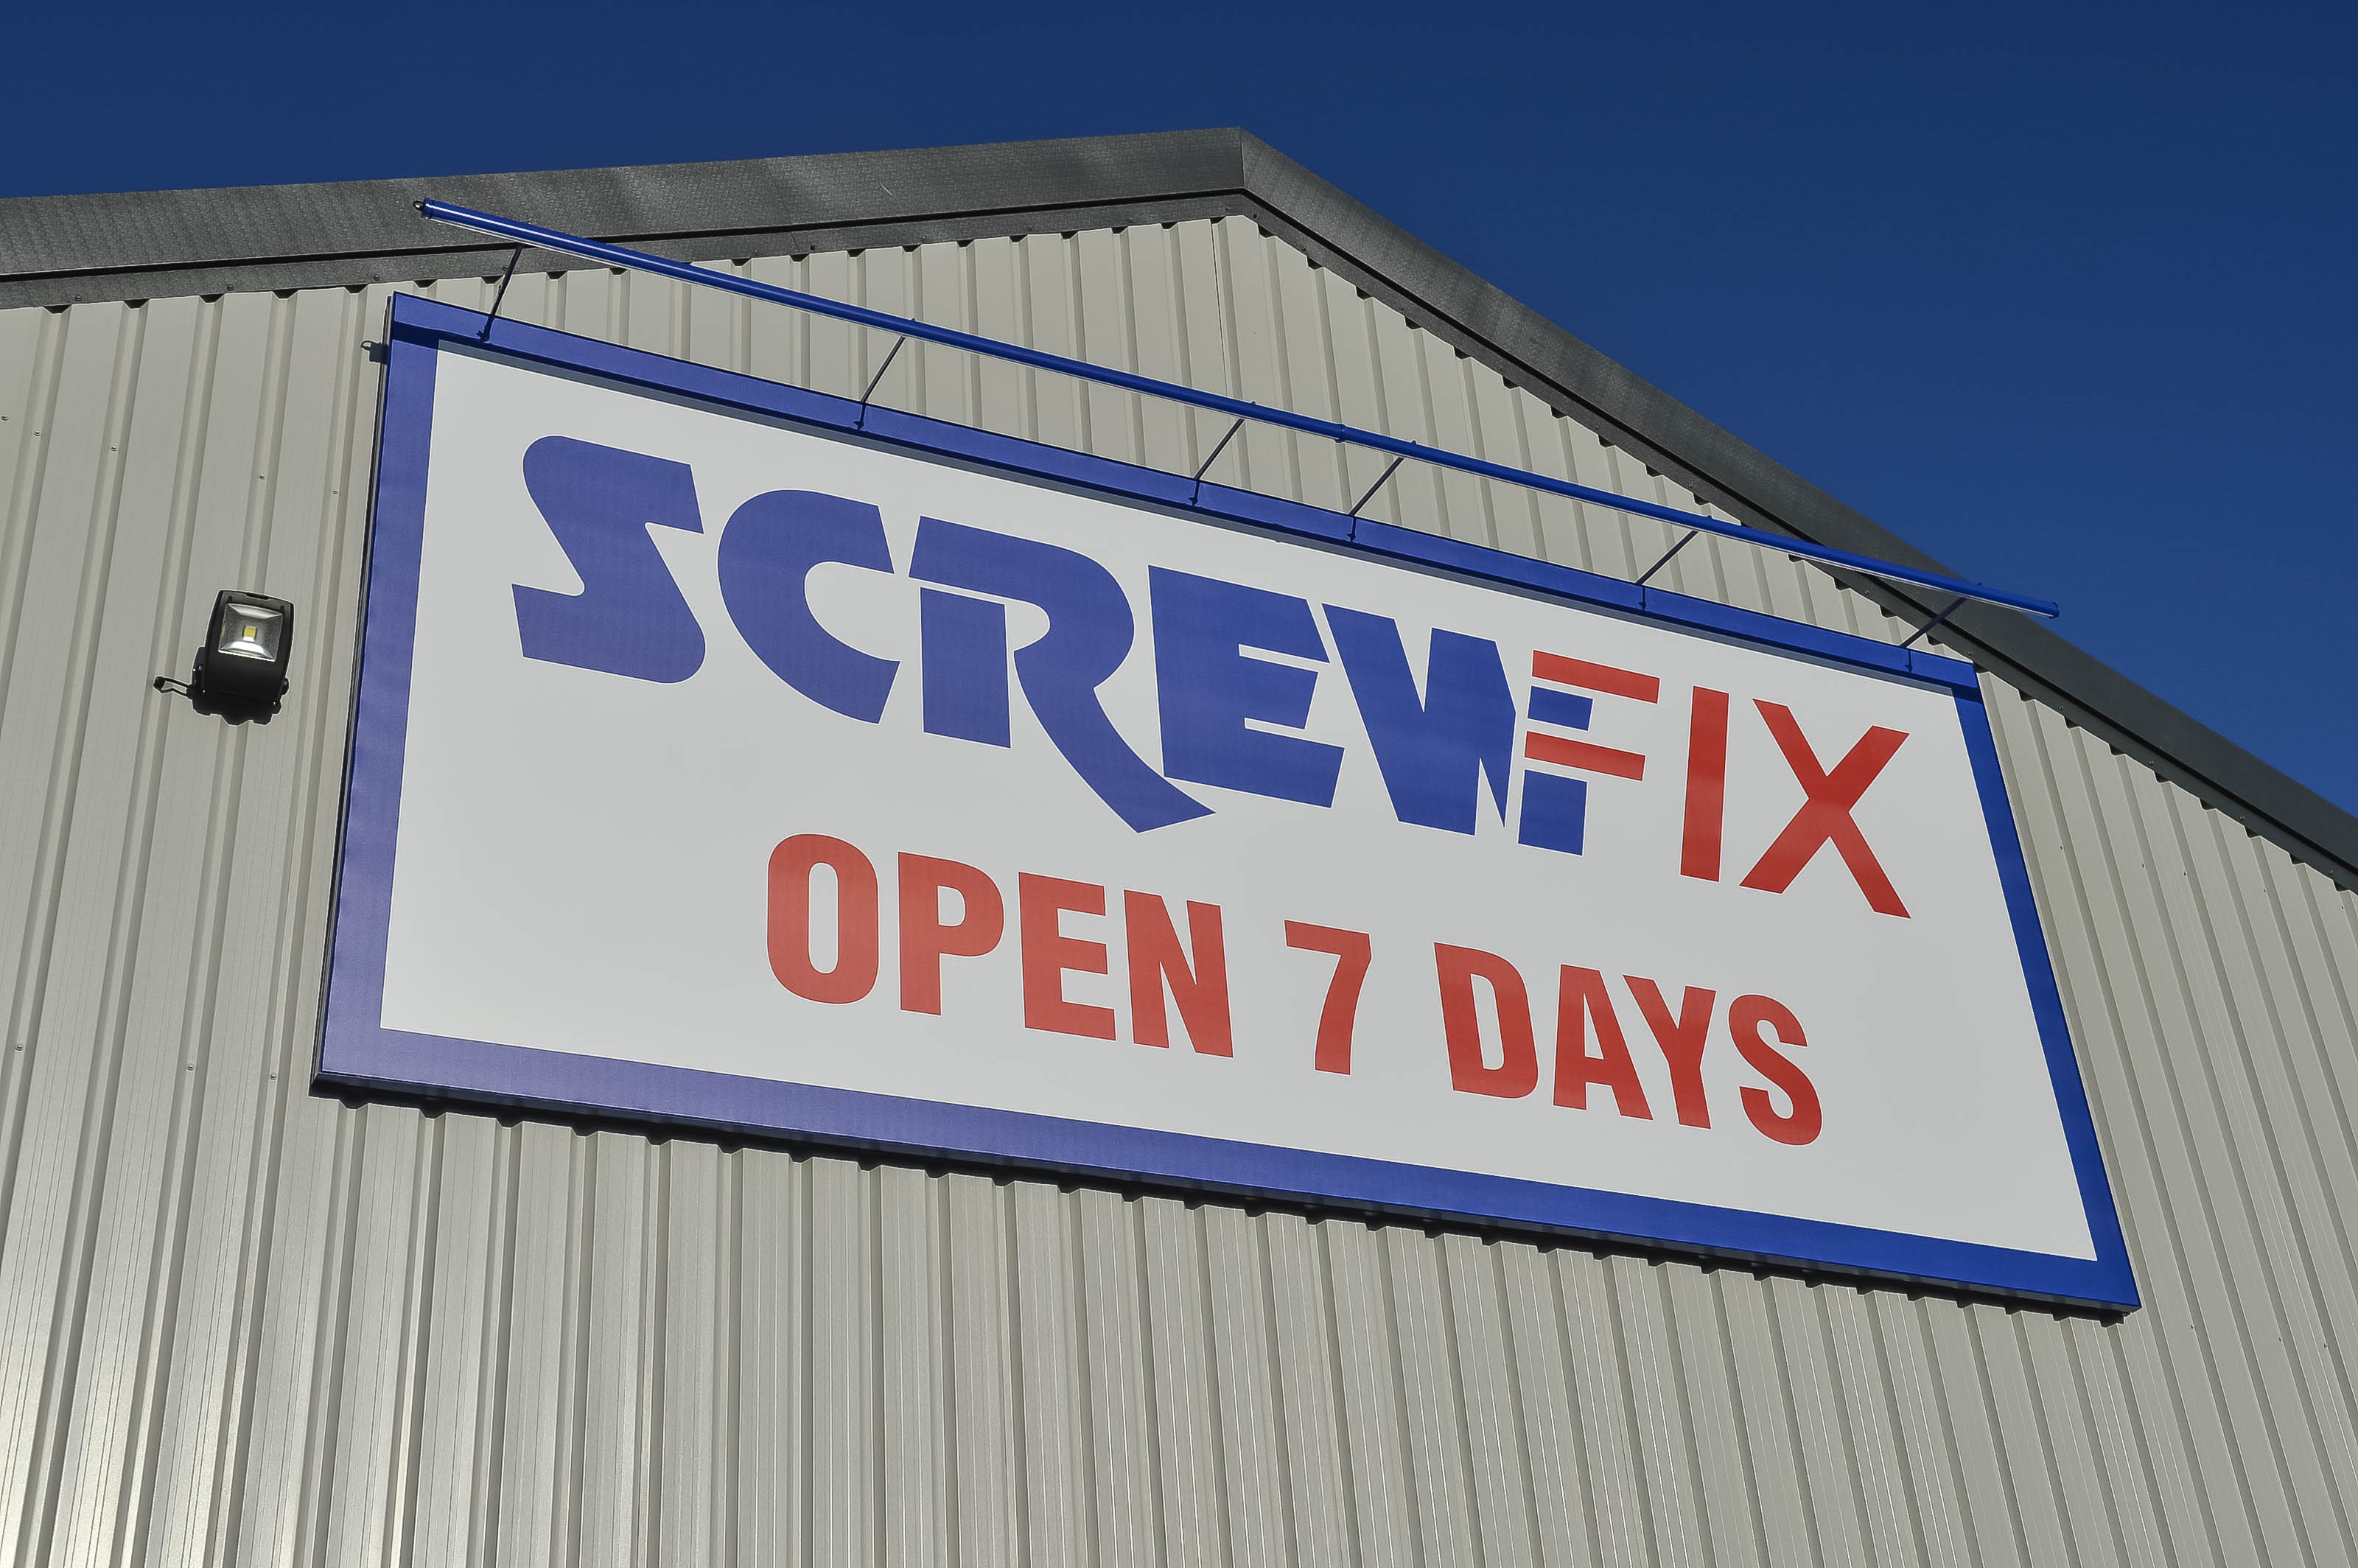 Screwfix opens its doors in Doncaster-Sprotbrough Road